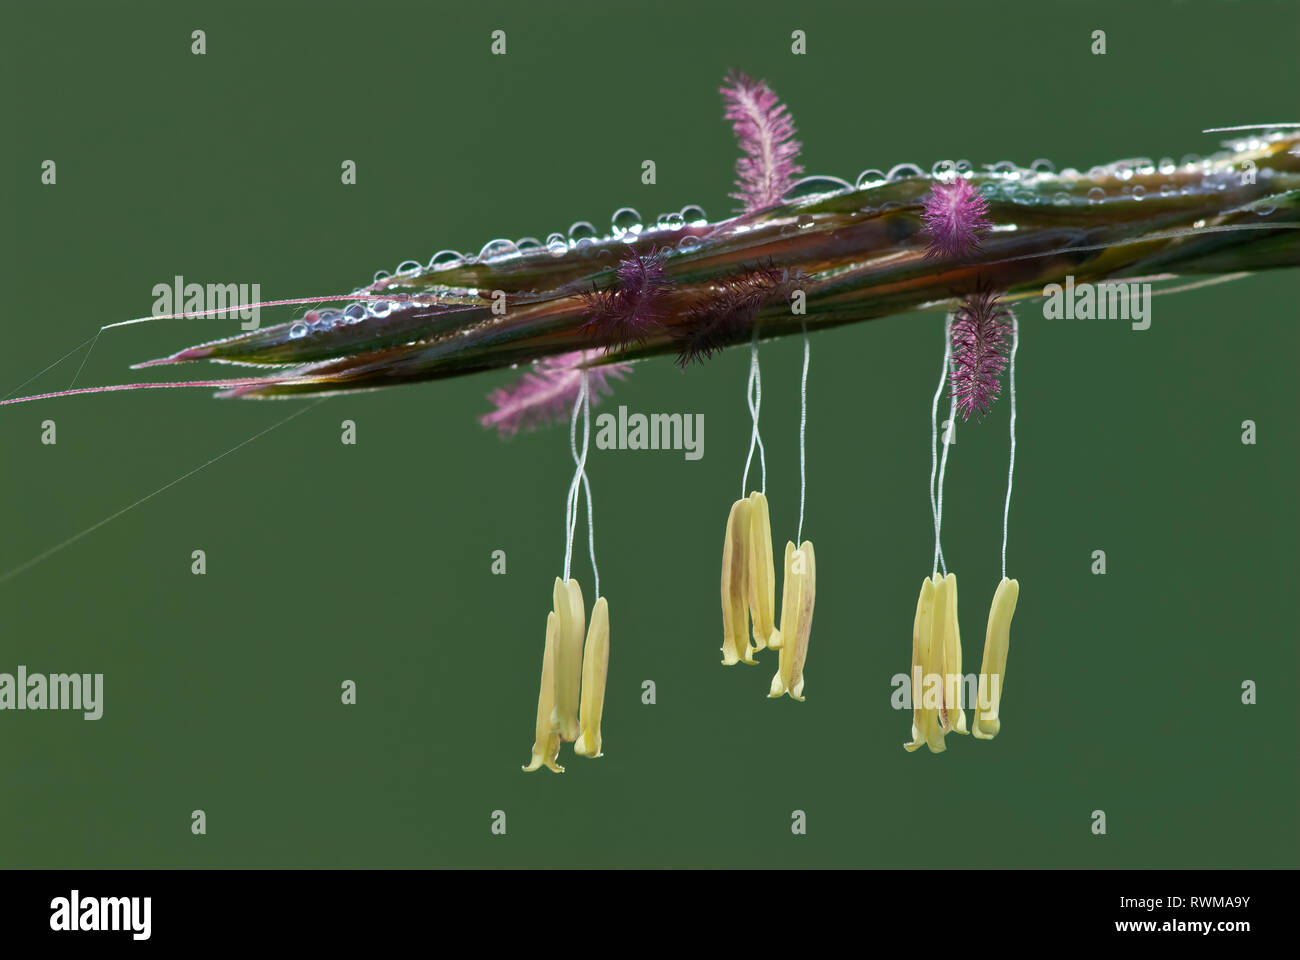 Dew-covered flowers of big bluestem grass (Andropogon gerardii), showing yellow anthers (male) dangling beneath magenta stigmas (female). Stock Photo